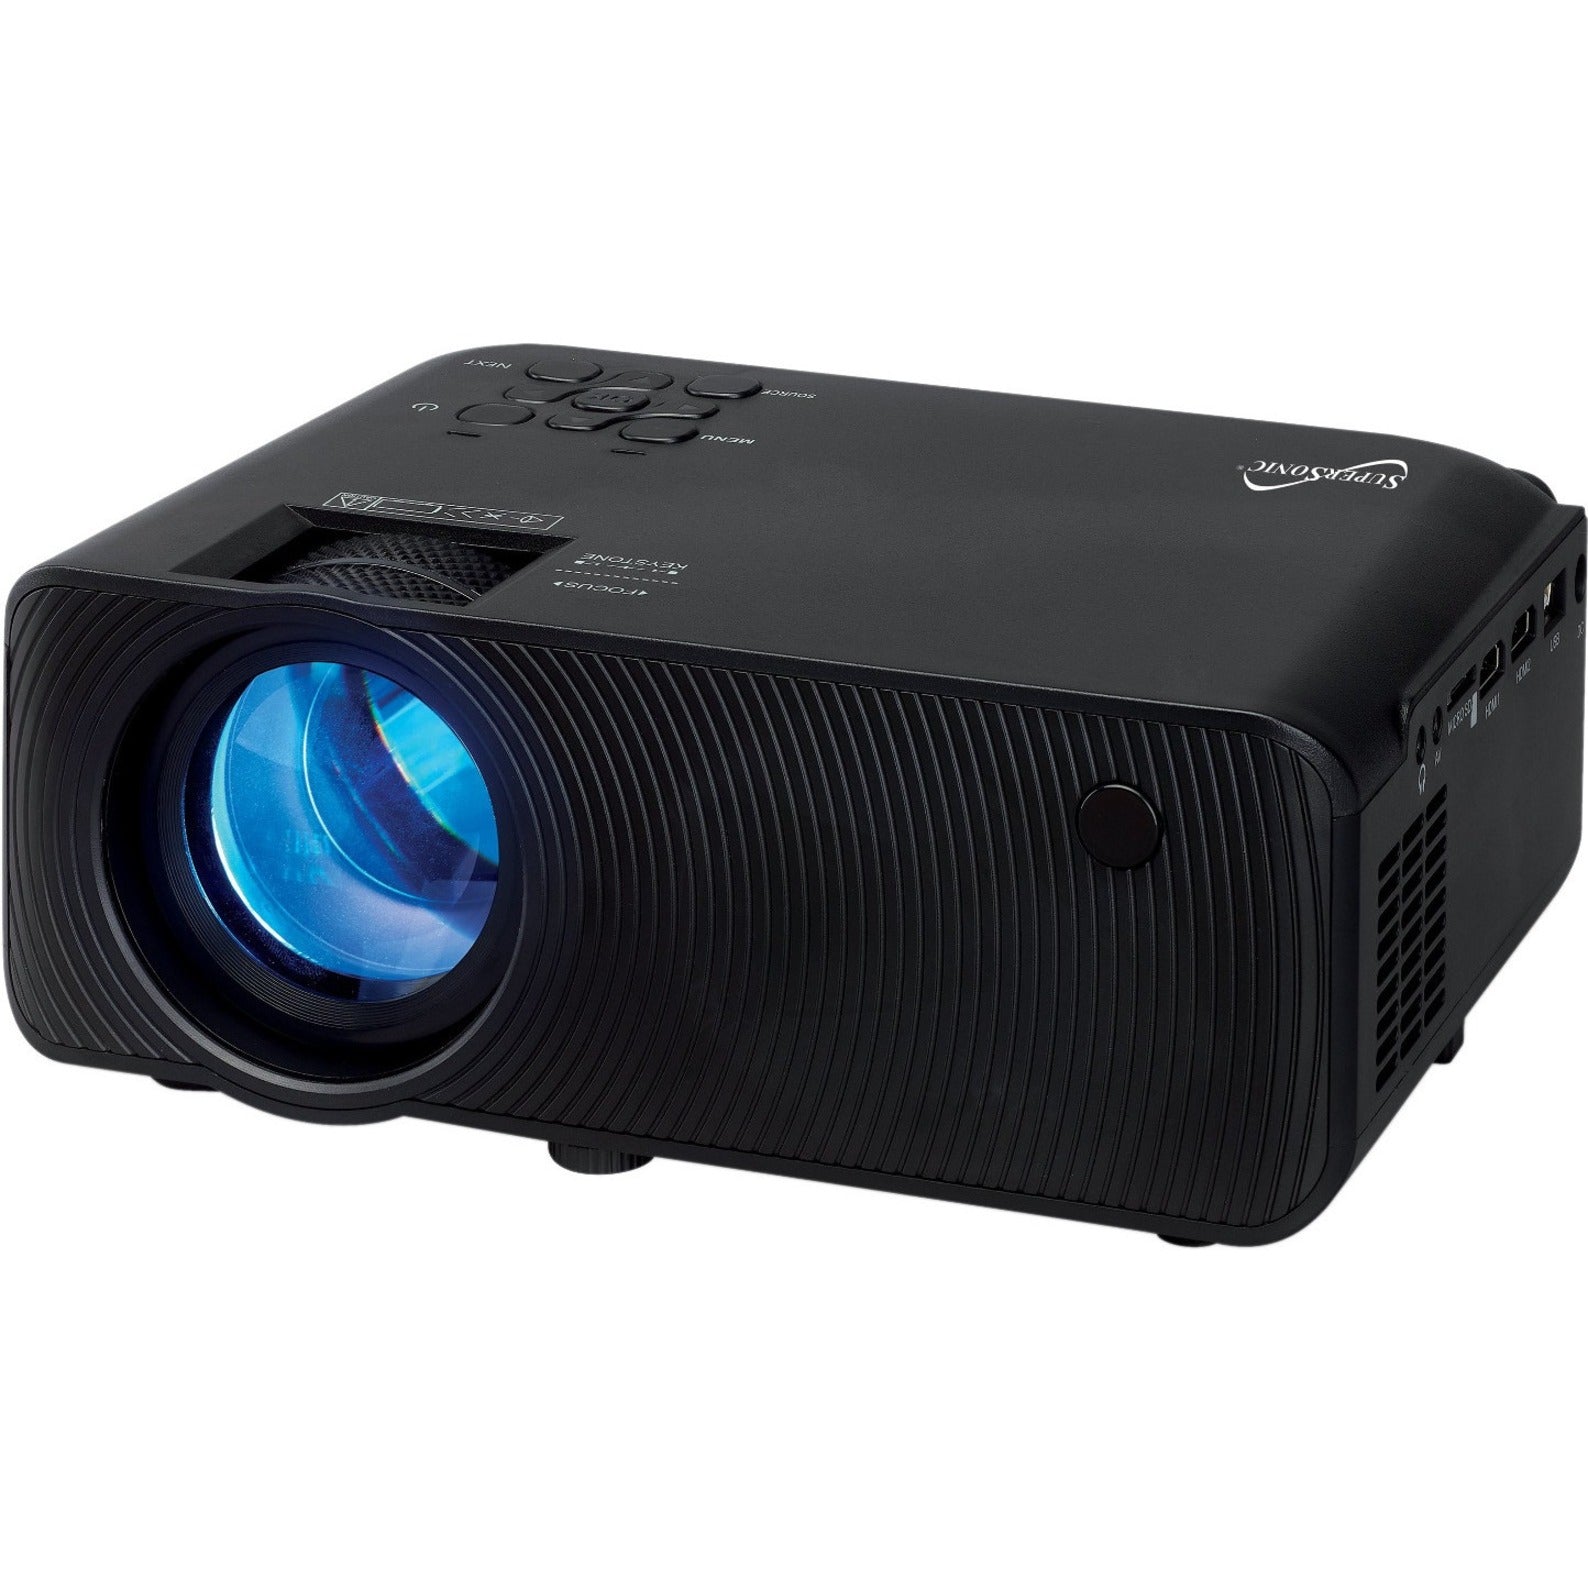 Supersonic SC-82P Home Theater Projector with Bluetooth, HD, 16:9, 7000 lm